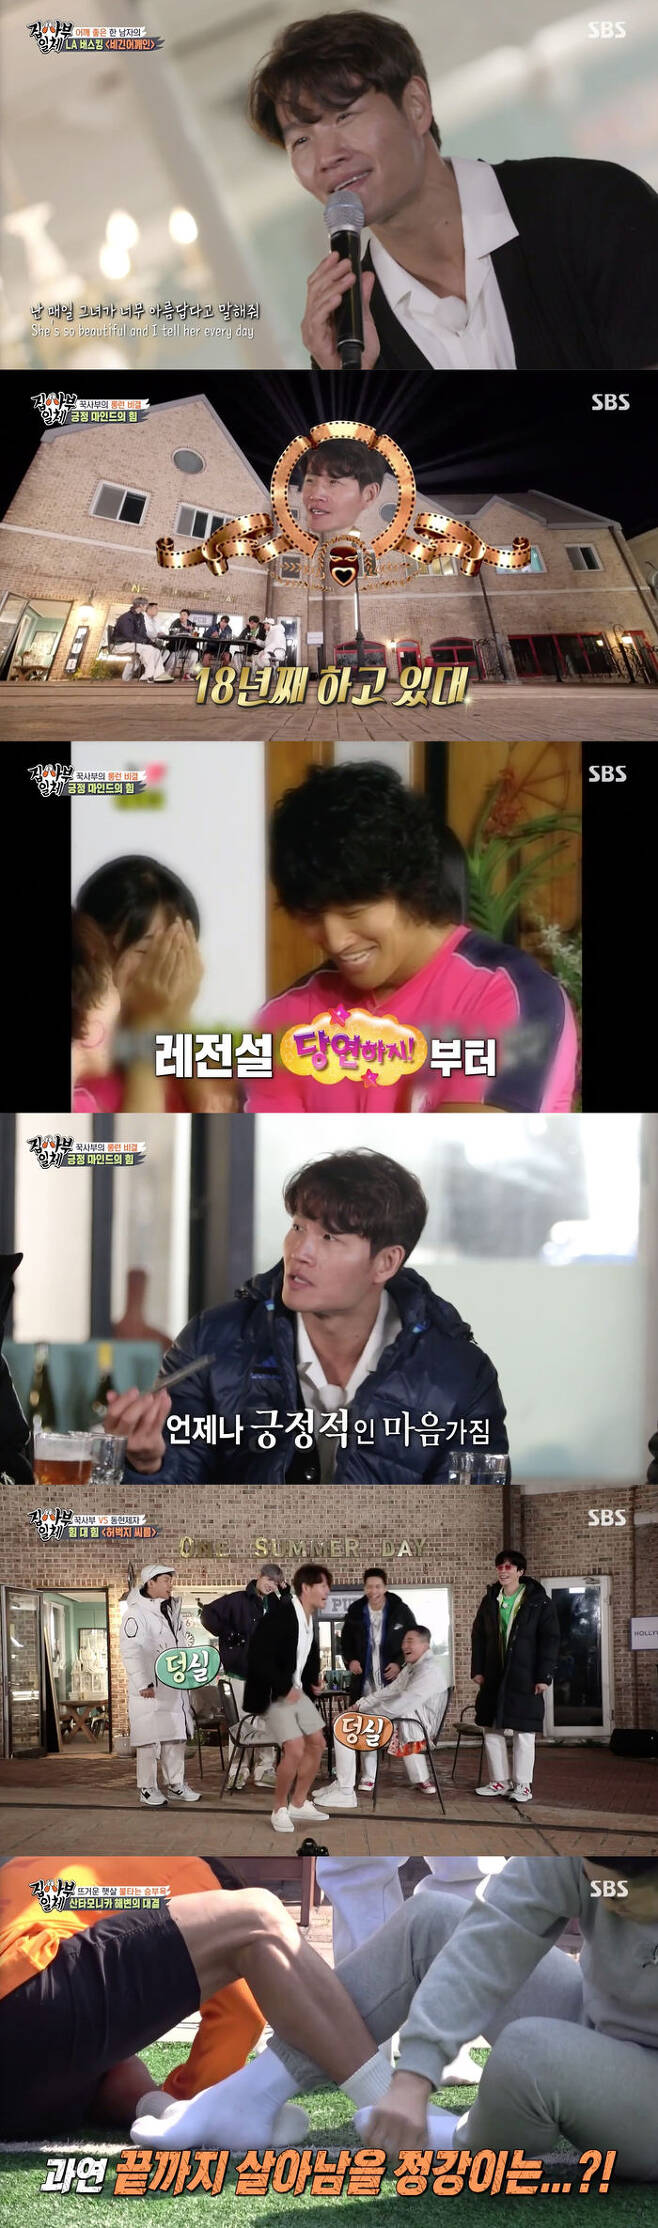 Master left his disciples and surrogate satisfaction for LA vacation.On SBS All The Butlers broadcast on the 18th, the LA vacation with Kim Jong-kook Master was released.On this day, the disciples asked Master to sing a song that would make LA night more beautiful.So Master attracted attention by singing Bourno Mars just the way you are.And Lee Seung-gi mentioned Kim Jong-kooks career, which has been playing SBS Sunday 9pm Drama entertainment for 18 years.Kim Jong-kook was responsible for Sunday 9pm Drama entertainment for a long time until the X-Men, the family came out, and the running man.Kim Jong-kook said, I am so grateful. I think it is more unfortunate if I try to do well.So, if you think that you are losing more and concessioning, you are so happy. I have been training to find something positive and make it a good thing, especially if I have a negative thing to think about for a long time.It seems to be a great help, he said. It is good to think that you can do more leg exercises, not to be depressed because your hands are hurt. On the day of the broadcast, Kim Jong-kook also burned his extraordinary desire to win.The disciples encouraged a Revenge match, referring to Kim Jong-kook, who had been defeated in Wrestle against Kim Dong-Hyun in the past.Kim Jong-kook was motivated to defeat Kim Dong-Hyun and High Wrestle.Prior to the High Wrestle, Kim Dong-Hyun said: I think the High Wrestle is weak.I always fight back and forth and I do not do sideways, so the High Wrestle is weak. Kim Jong-kook said, What if you come in next to Dong Hyun-ah?What if I fight back and forth? In the High Wrestle in the second leg, Kim Jong-kook won the victory and showed off the power of the buck.At the end of the broadcast, Kim Jong-kook was asked about the results of Kim Dong-Hyun, who once again challenged Kim Jong-kook with Wrestle.